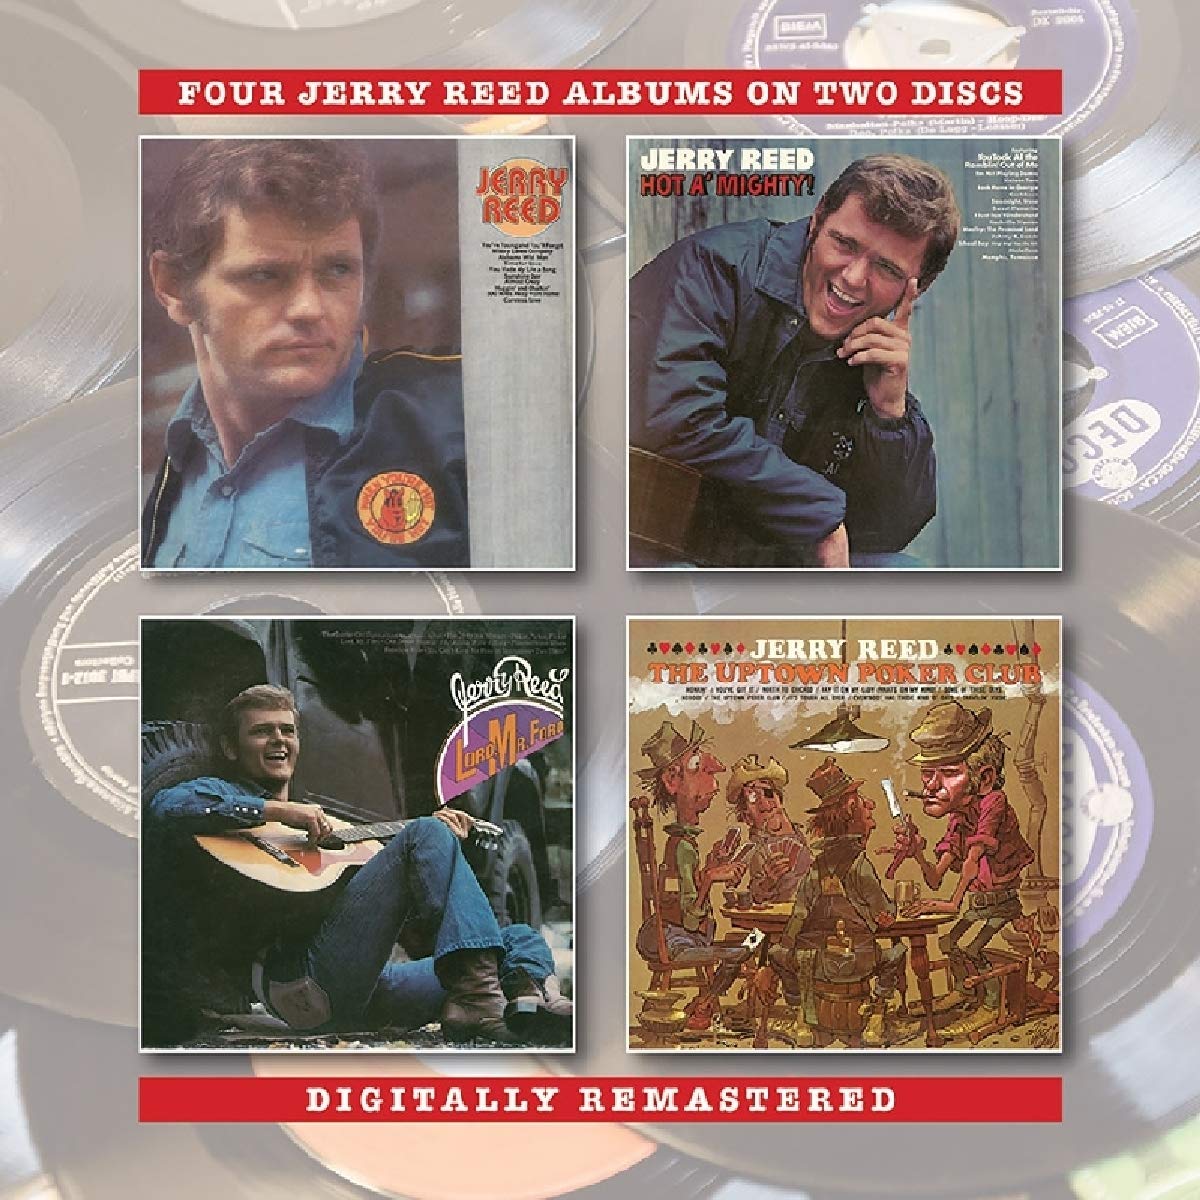 JERRY REED / ジェリー・リード / JERRY REED / HOT A' MIGHTY / LORD, MR. FORD / THE UPTOWN POKER CLUB